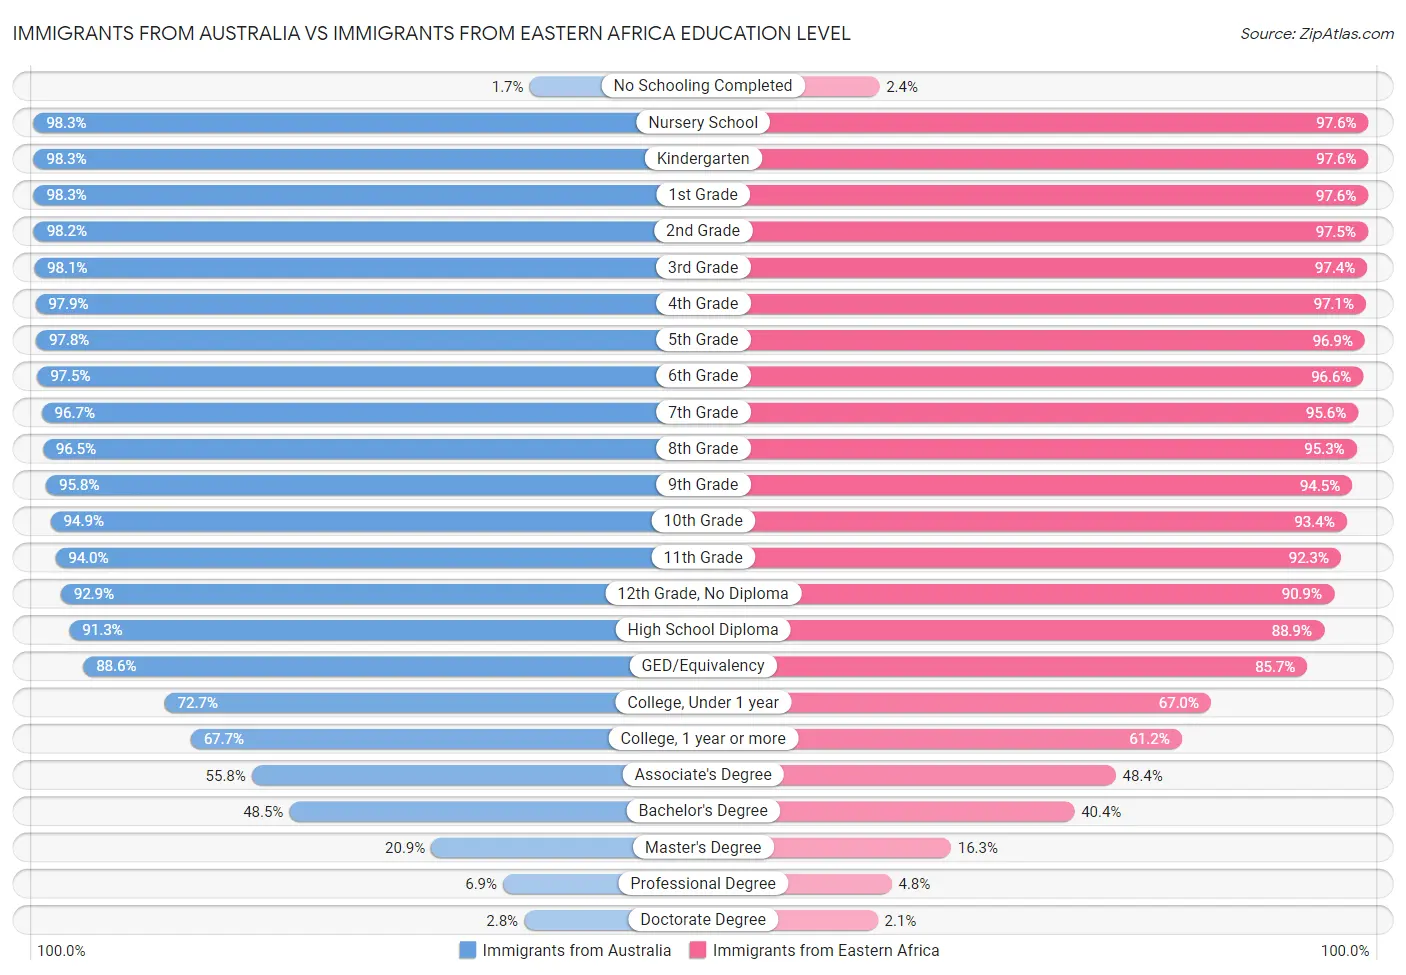 Immigrants from Australia vs Immigrants from Eastern Africa Education Level